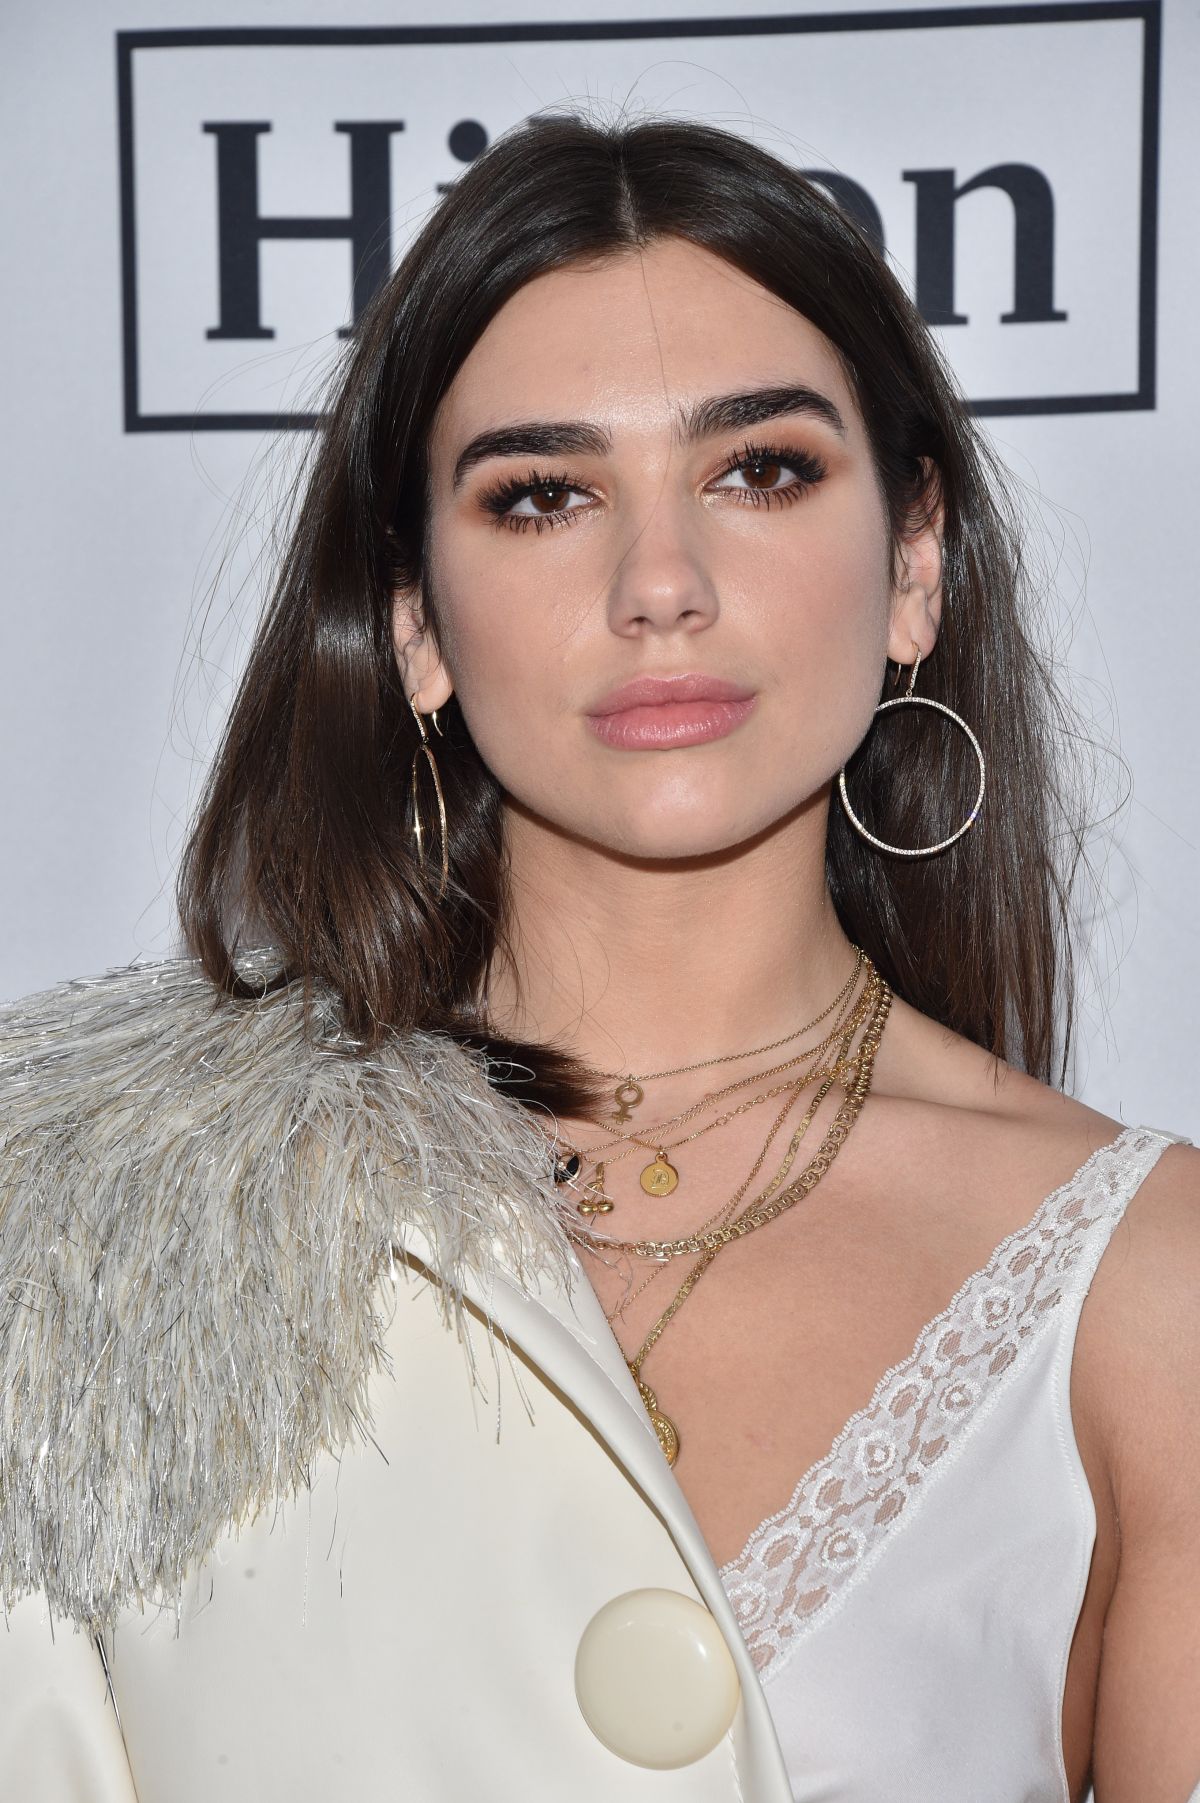 DUA LIPA at Clive Davis and Recording Academy PreGrammy Gala in New